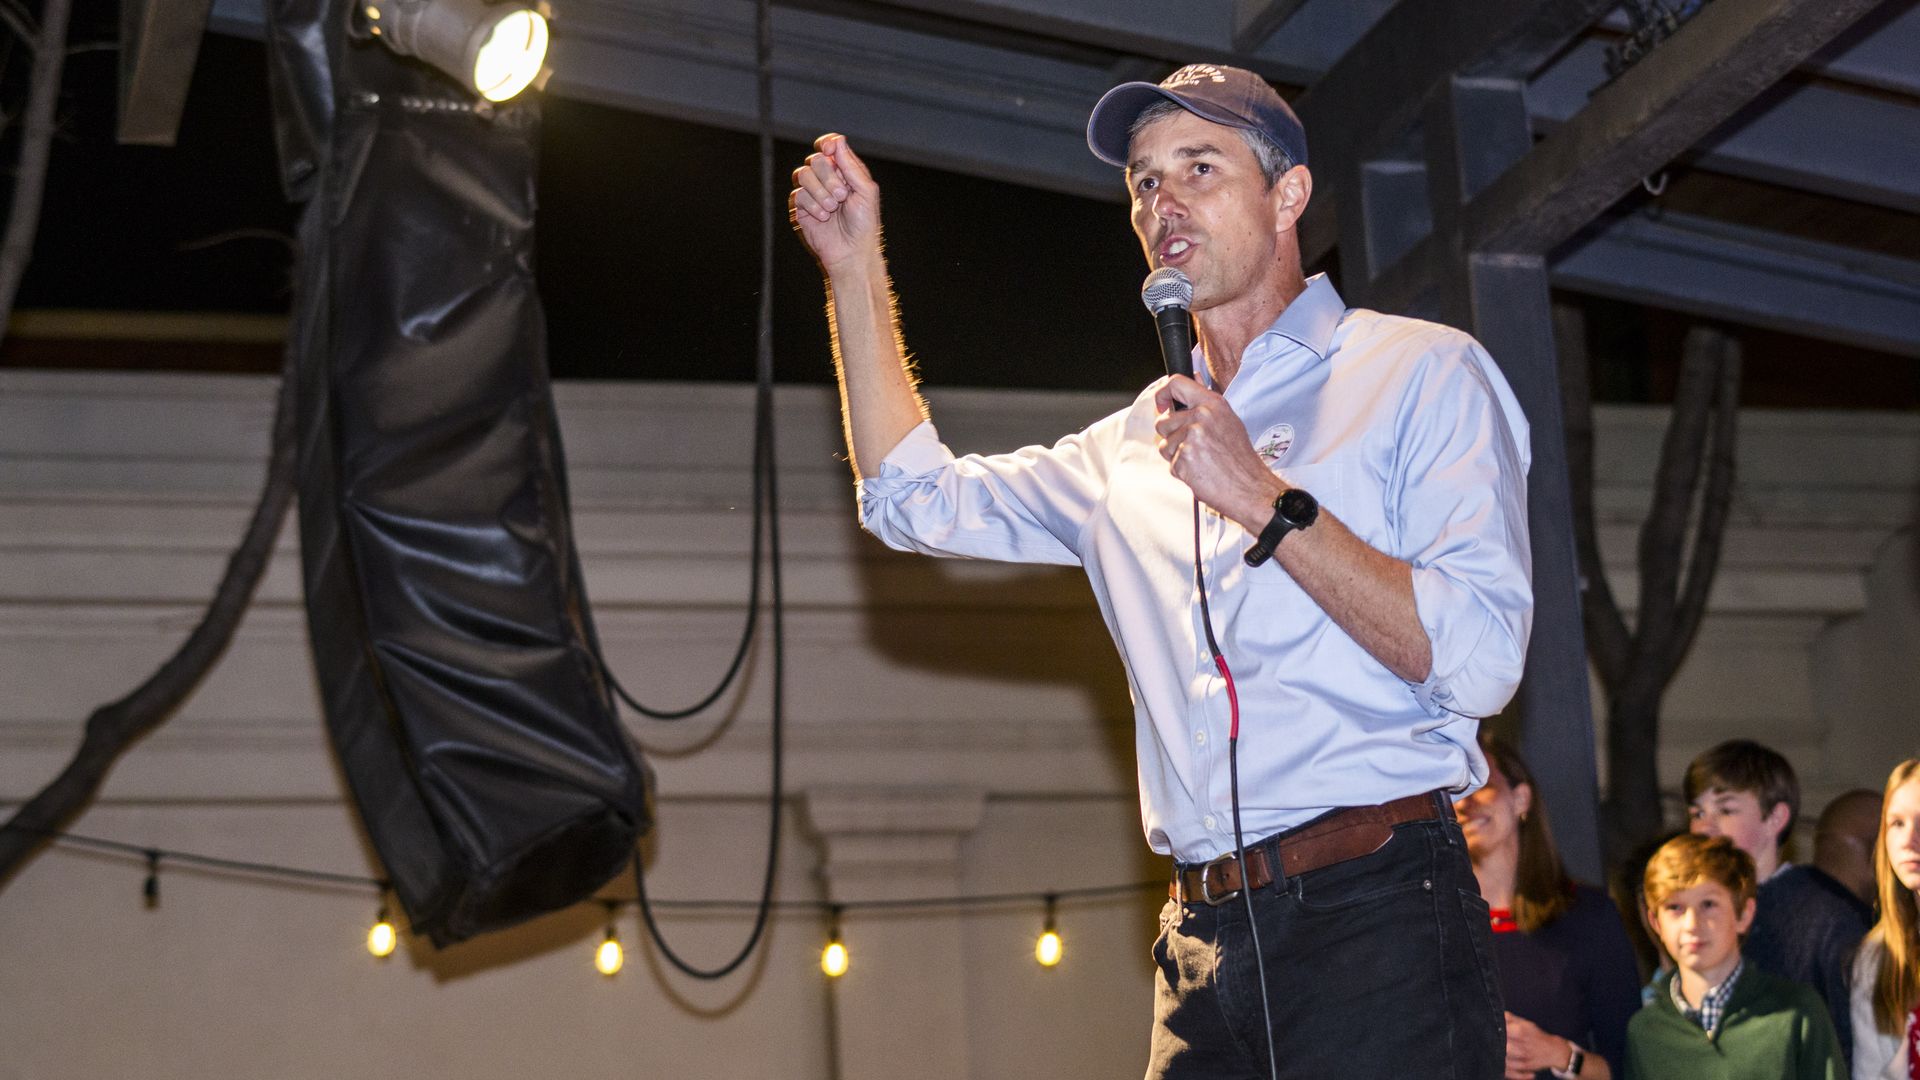 Beto O'Rourke, Democratic gubernatorial candidate for Texas, speaks during a primary election night event in Fort Worth, Texas, U.S., on Tuesday, March 1, 2022